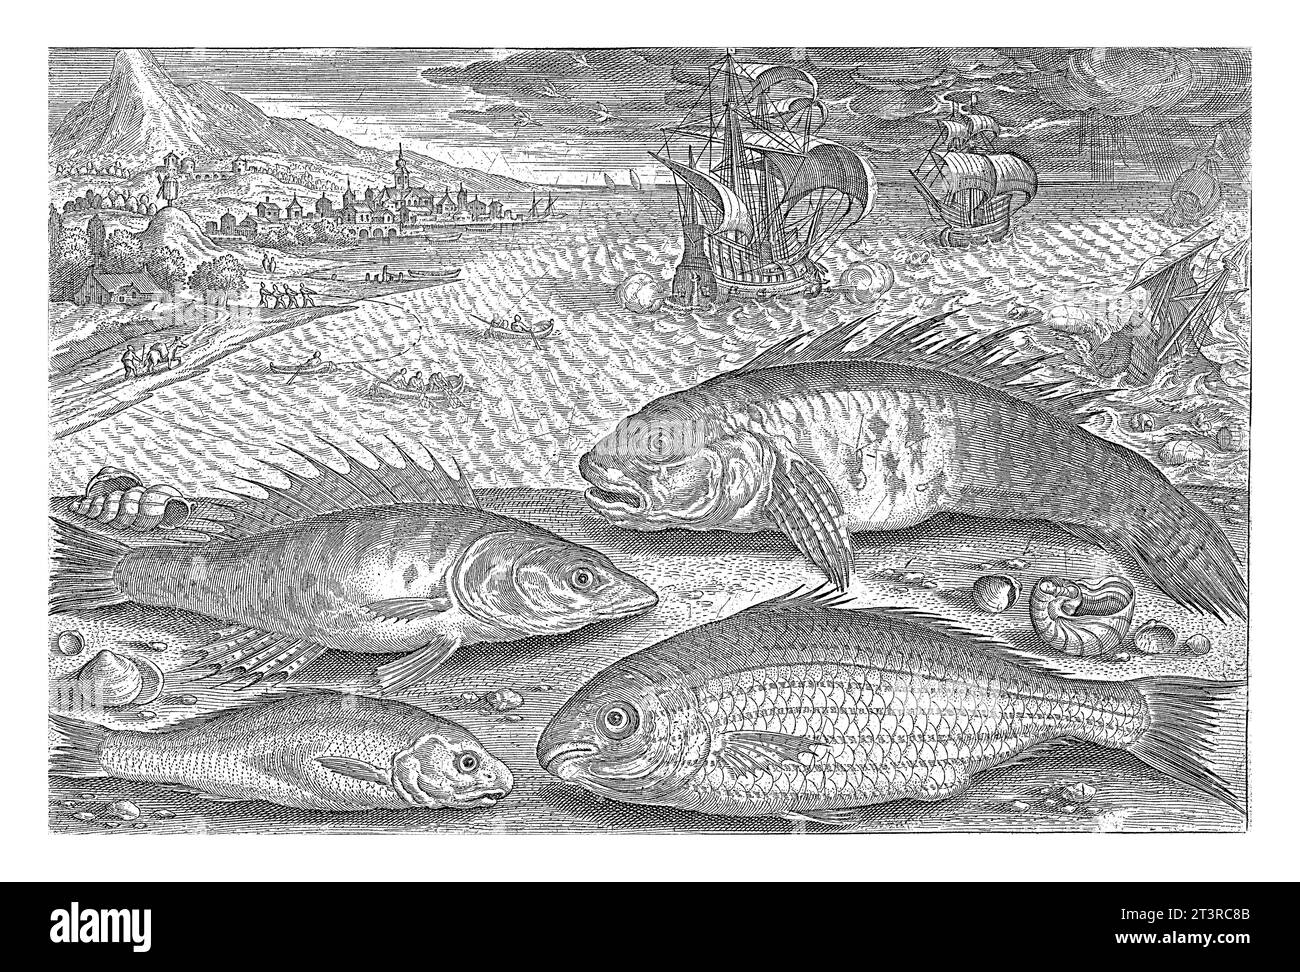 Four fish on the beach, Adriaen Collaert, 1627 - 1636 A boxfish, a perch, a gudgeon and an unknown fish are washed up on the beach along with some she Stock Photo